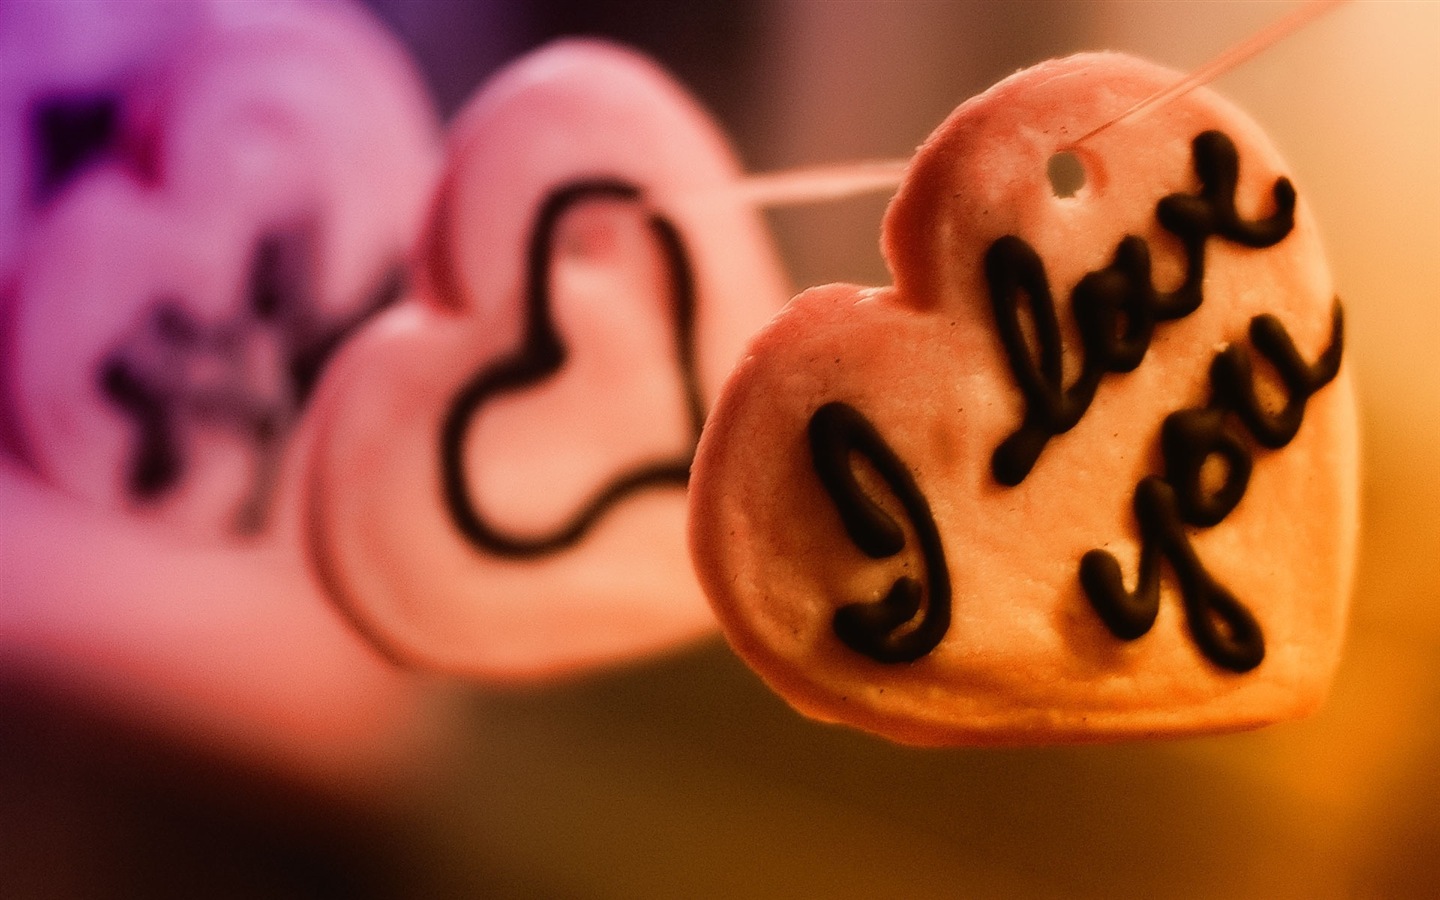 Warm and romantic Valentine's Day HD wallpapers #4 - 1440x900